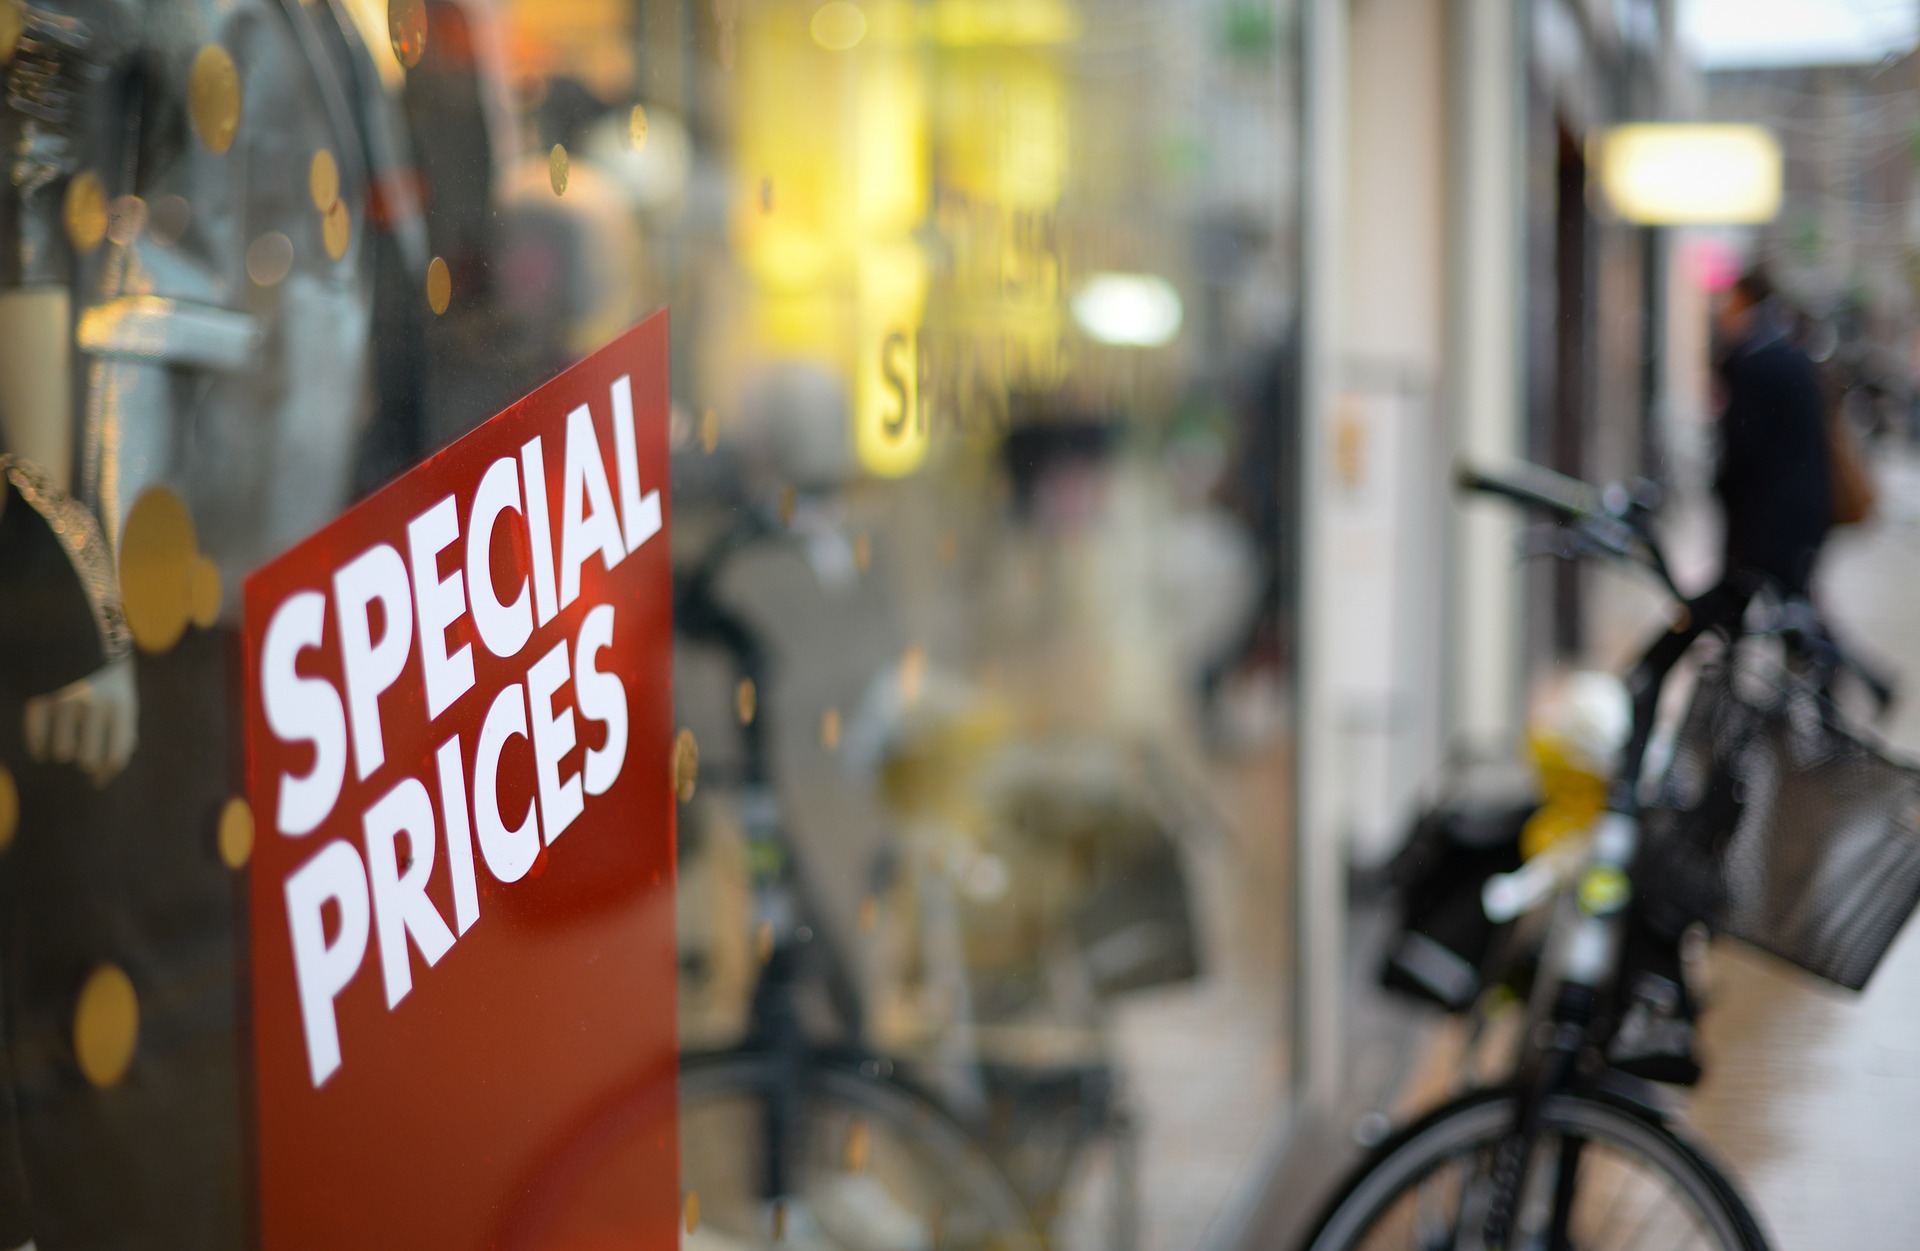 A read sign in front of a window that read Special Prices, a blurred bike in the background